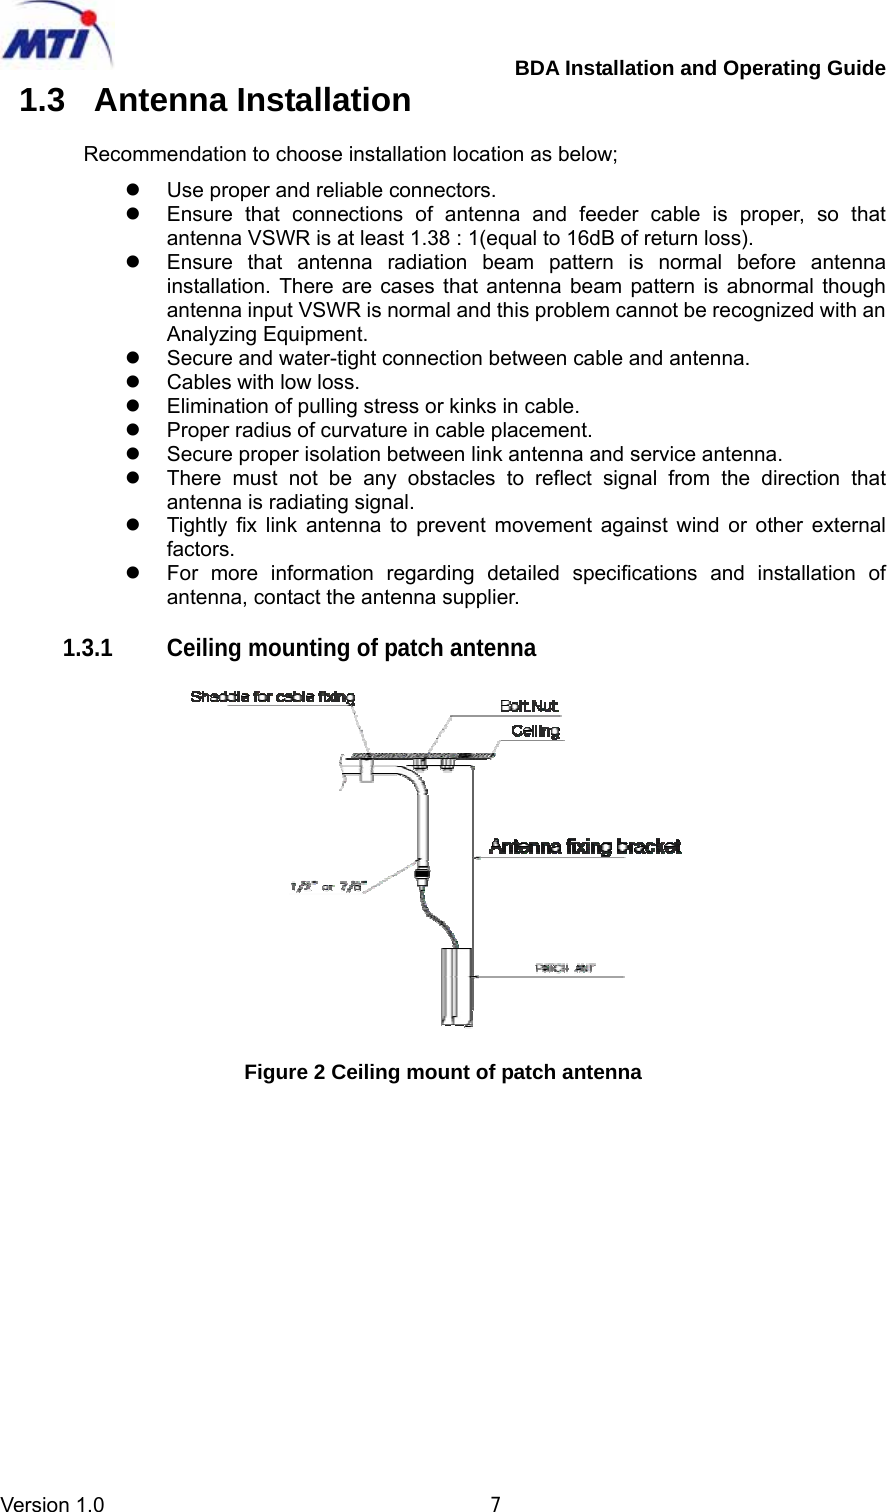         BDA Installation and Operating Guide Version 1.0                                       7 1.3 Antenna Installation  Recommendation to choose installation location as below; z  Use proper and reliable connectors. z  Ensure that connections of antenna and feeder cable is proper, so that antenna VSWR is at least 1.38 : 1(equal to 16dB of return loss). z  Ensure that antenna radiation beam pattern is normal before antenna installation. There are cases that antenna beam pattern is abnormal though antenna input VSWR is normal and this problem cannot be recognized with an Analyzing Equipment. z  Secure and water-tight connection between cable and antenna. z  Cables with low loss. z  Elimination of pulling stress or kinks in cable. z  Proper radius of curvature in cable placement. z  Secure proper isolation between link antenna and service antenna. z  There must not be any obstacles to reflect signal from the direction that antenna is radiating signal. z  Tightly fix link antenna to prevent movement against wind or other external factors. z  For more information regarding detailed specifications and installation of antenna, contact the antenna supplier.  1.3.1  Ceiling mounting of patch antenna    Figure 2 Ceiling mount of patch antenna     